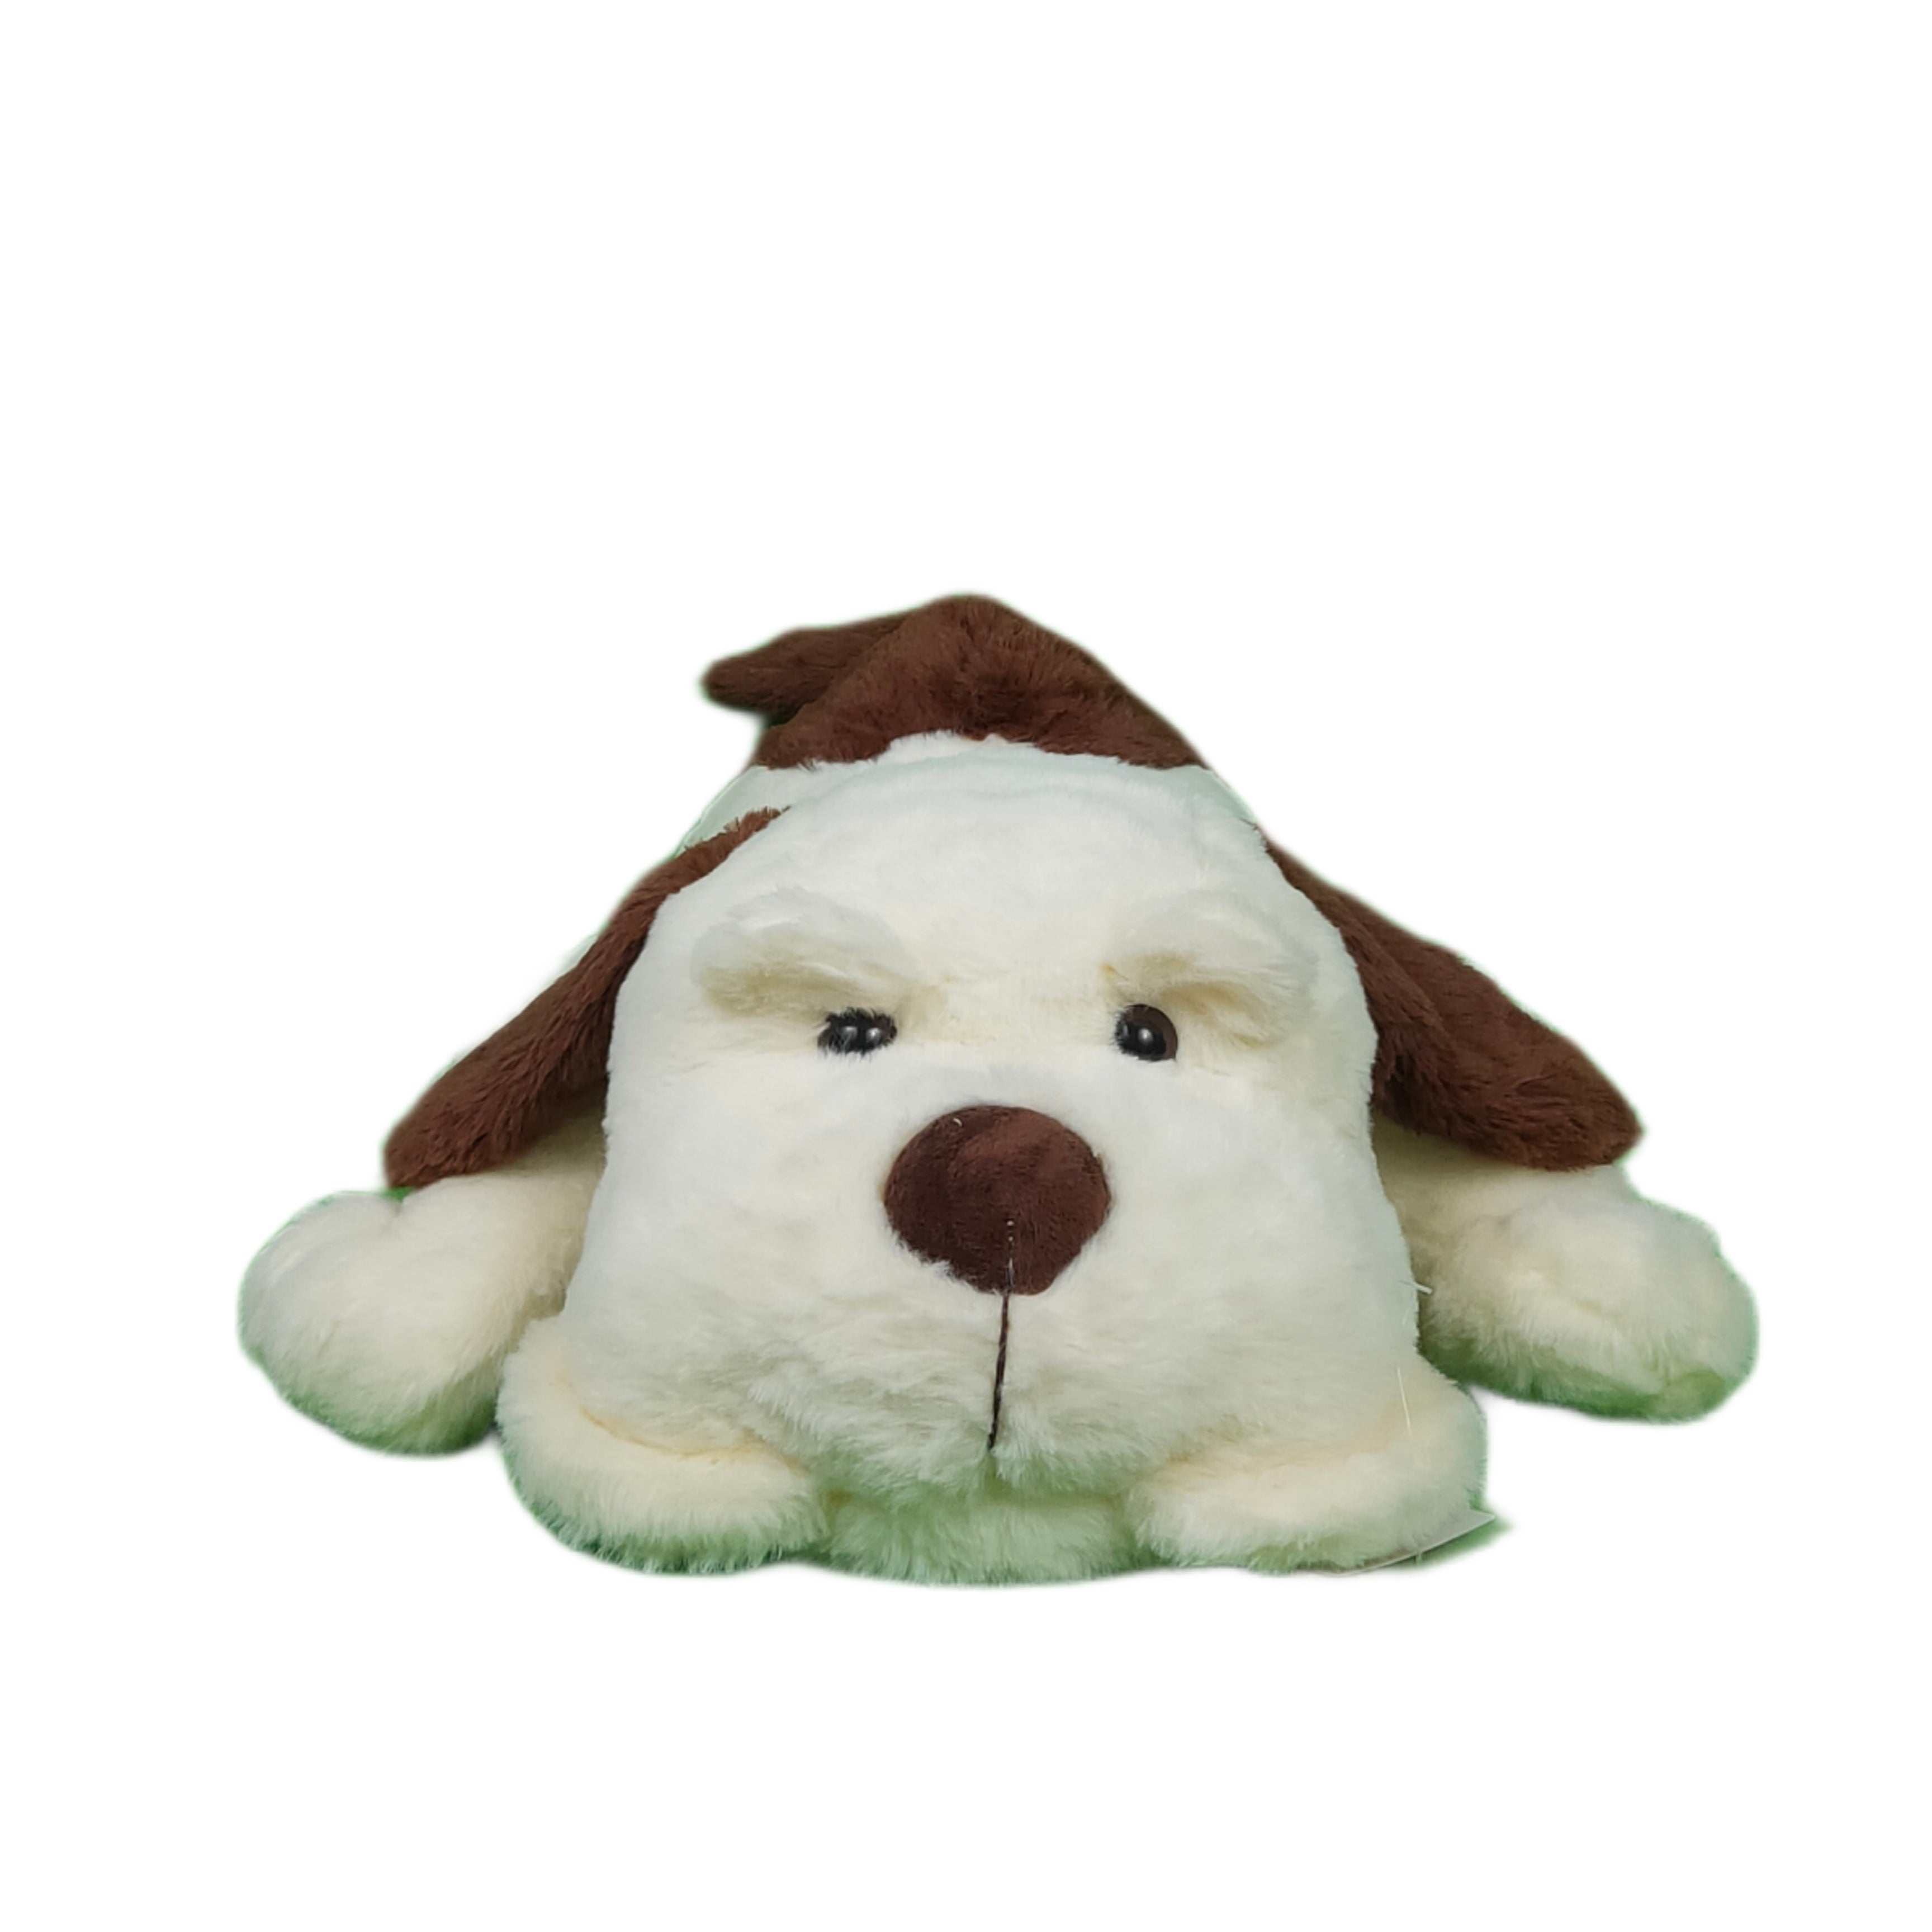 Play Hour Tobby The Dog Plush Soft with Long Choclate Ears Toy for Ages 3 Years and Up - 45cm